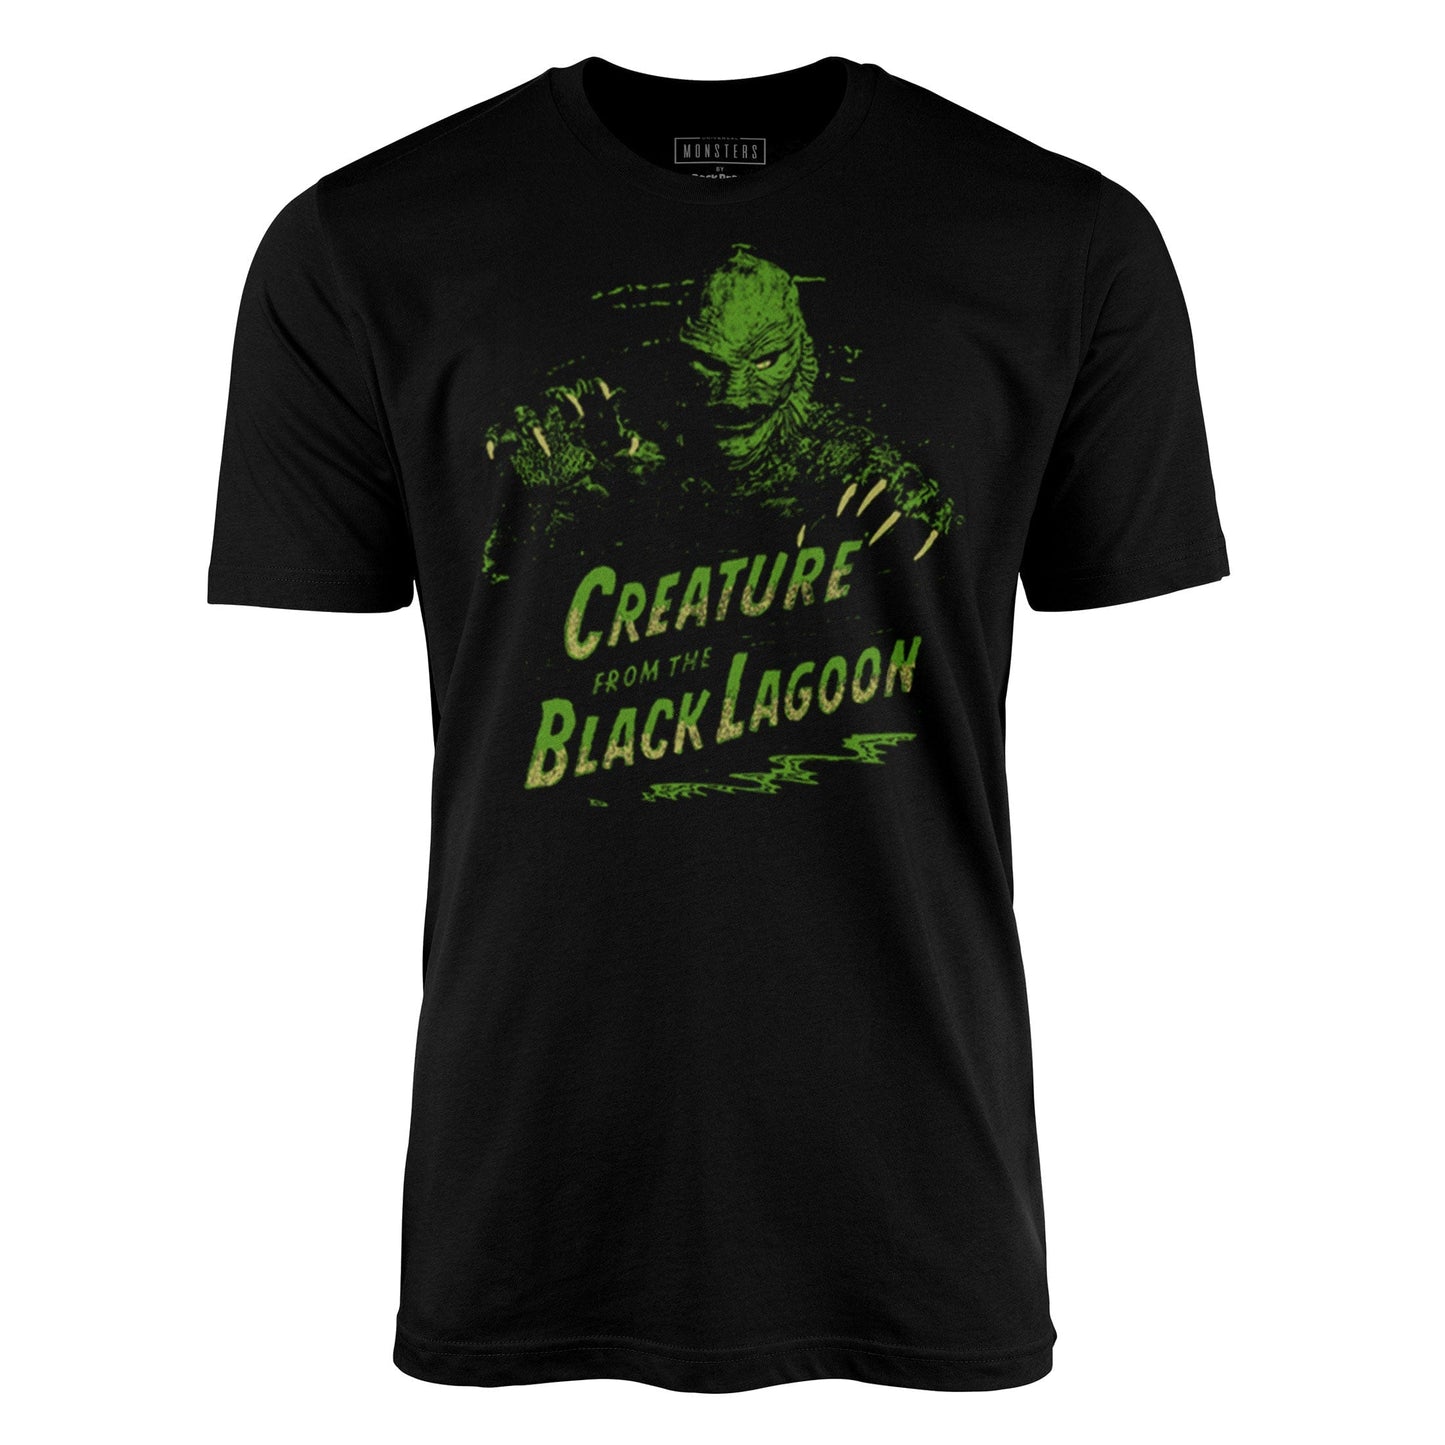 Green Creature From the Black Lagoon Men's Tee